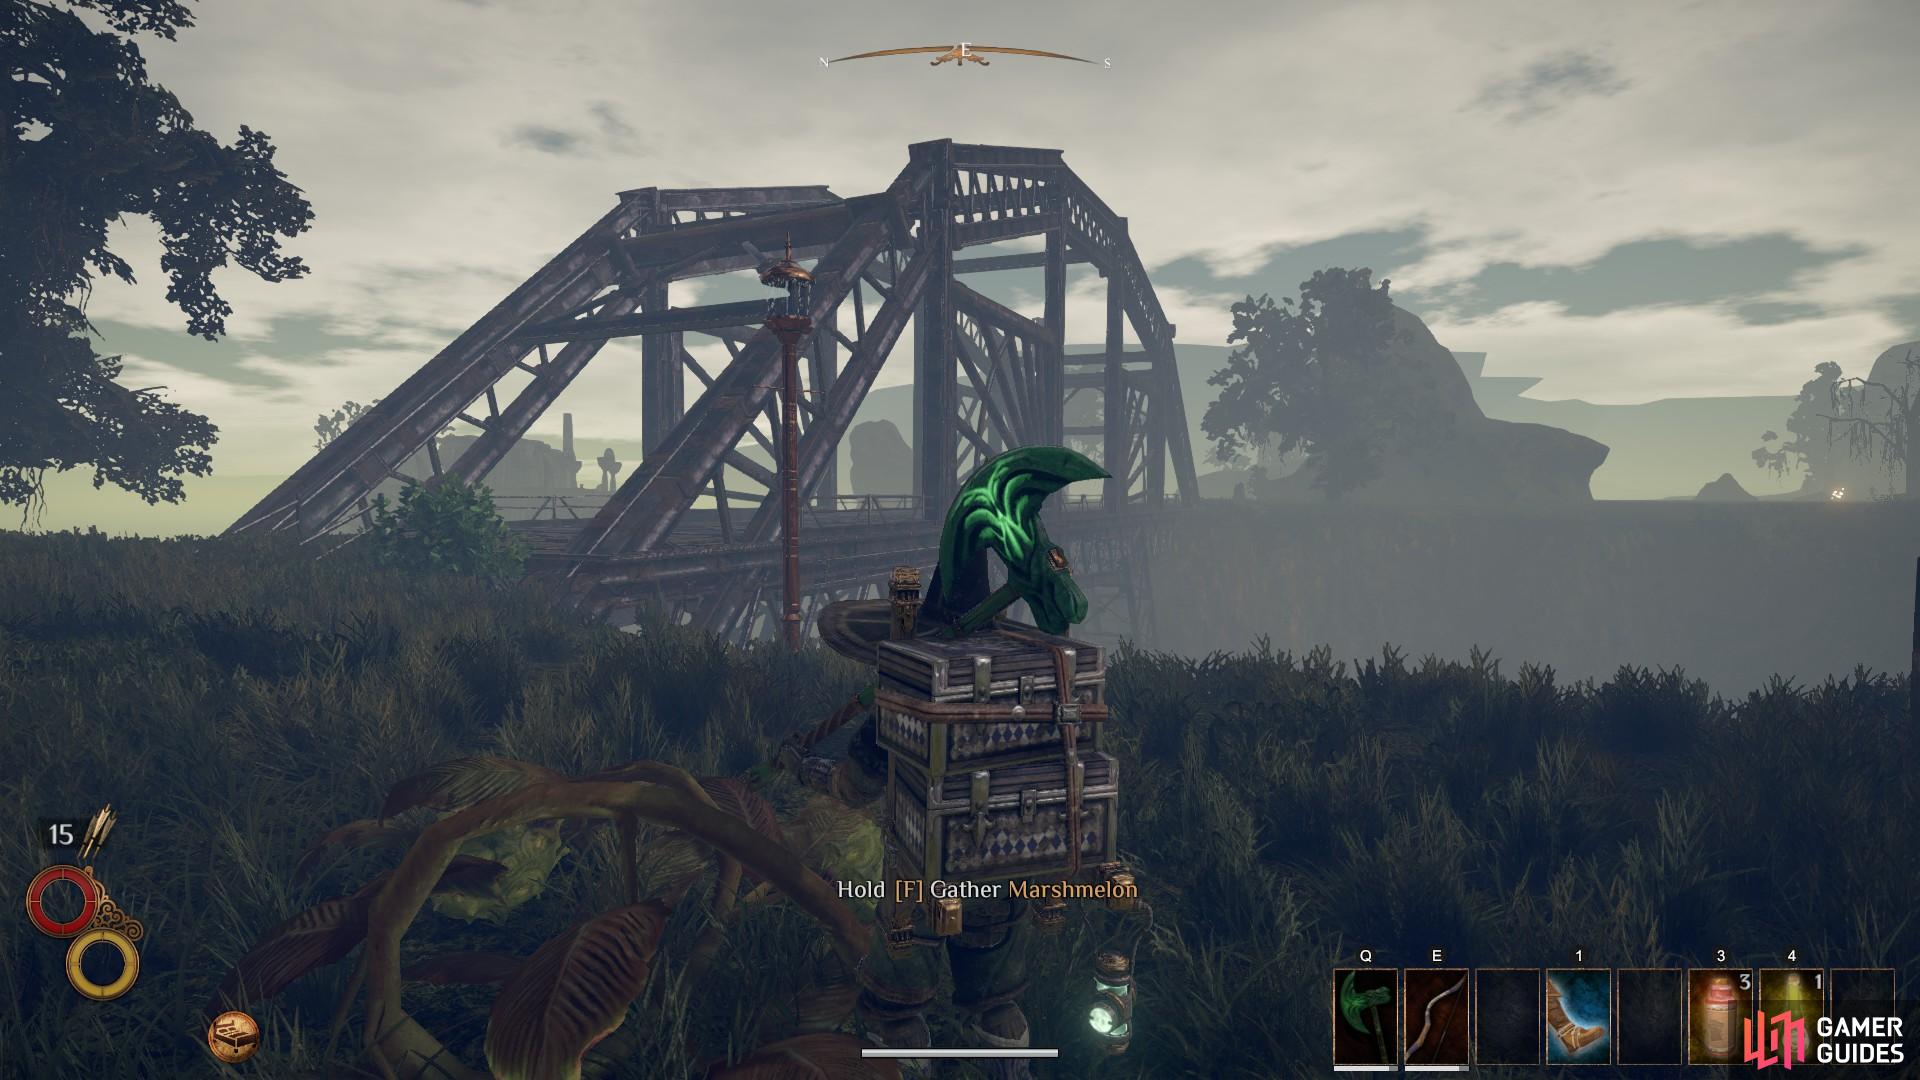 A first person perspective of the location of the second Marshmelon spawn in relation to the bridge.